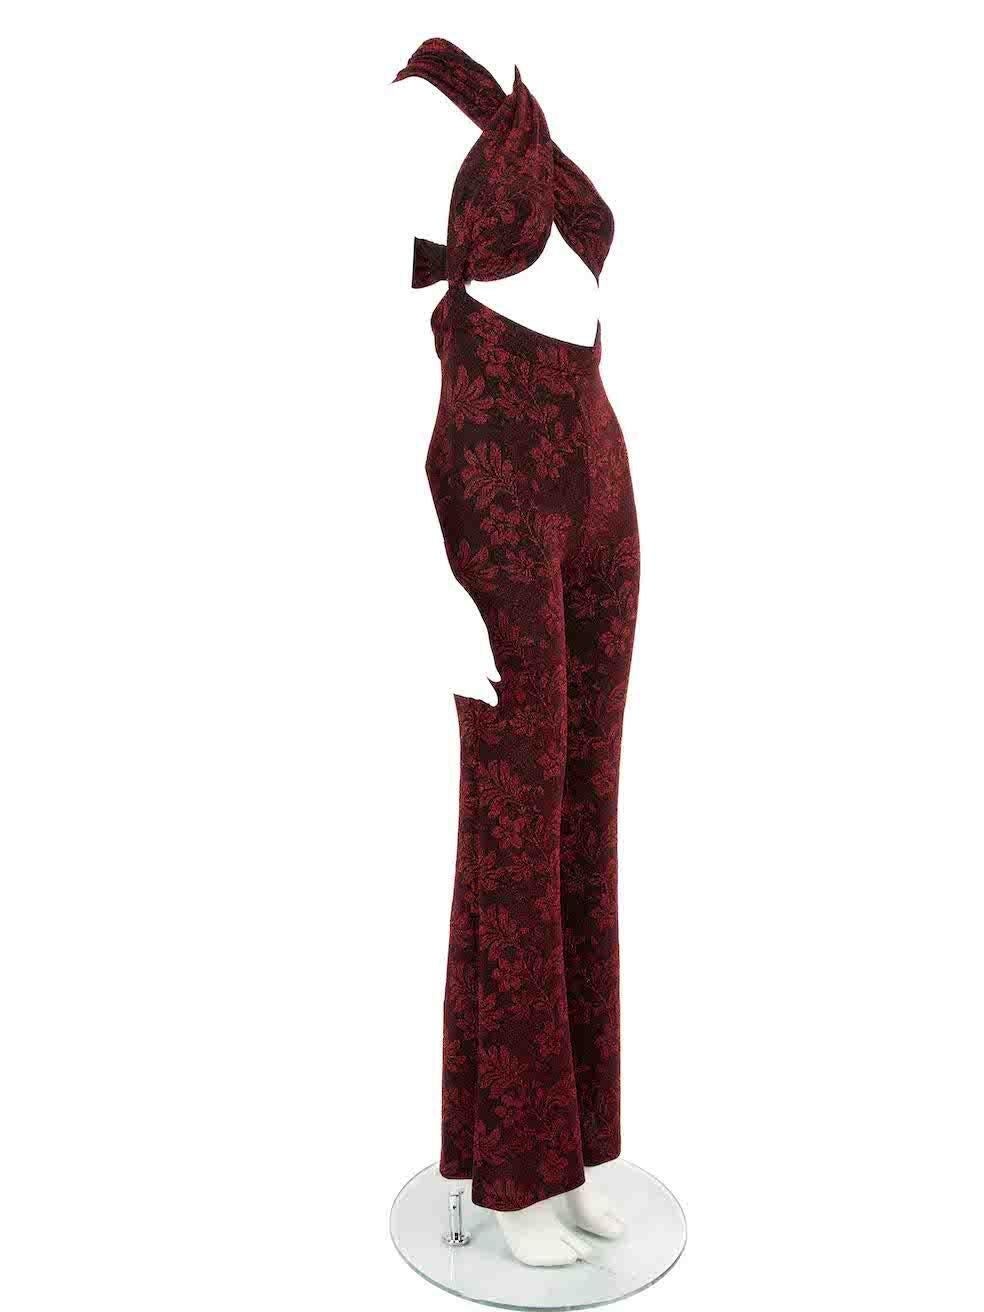 CONDITION is Very good. Minimal wear to jumpsuit is evident. Minimal wear to both legs with plucks to the metallic weave on this used House of Harlow 1960 x Revolve designer resale item.
 
 
 
 Details
 
 
 House of Harlow 1960 x Revolve
 
 Red